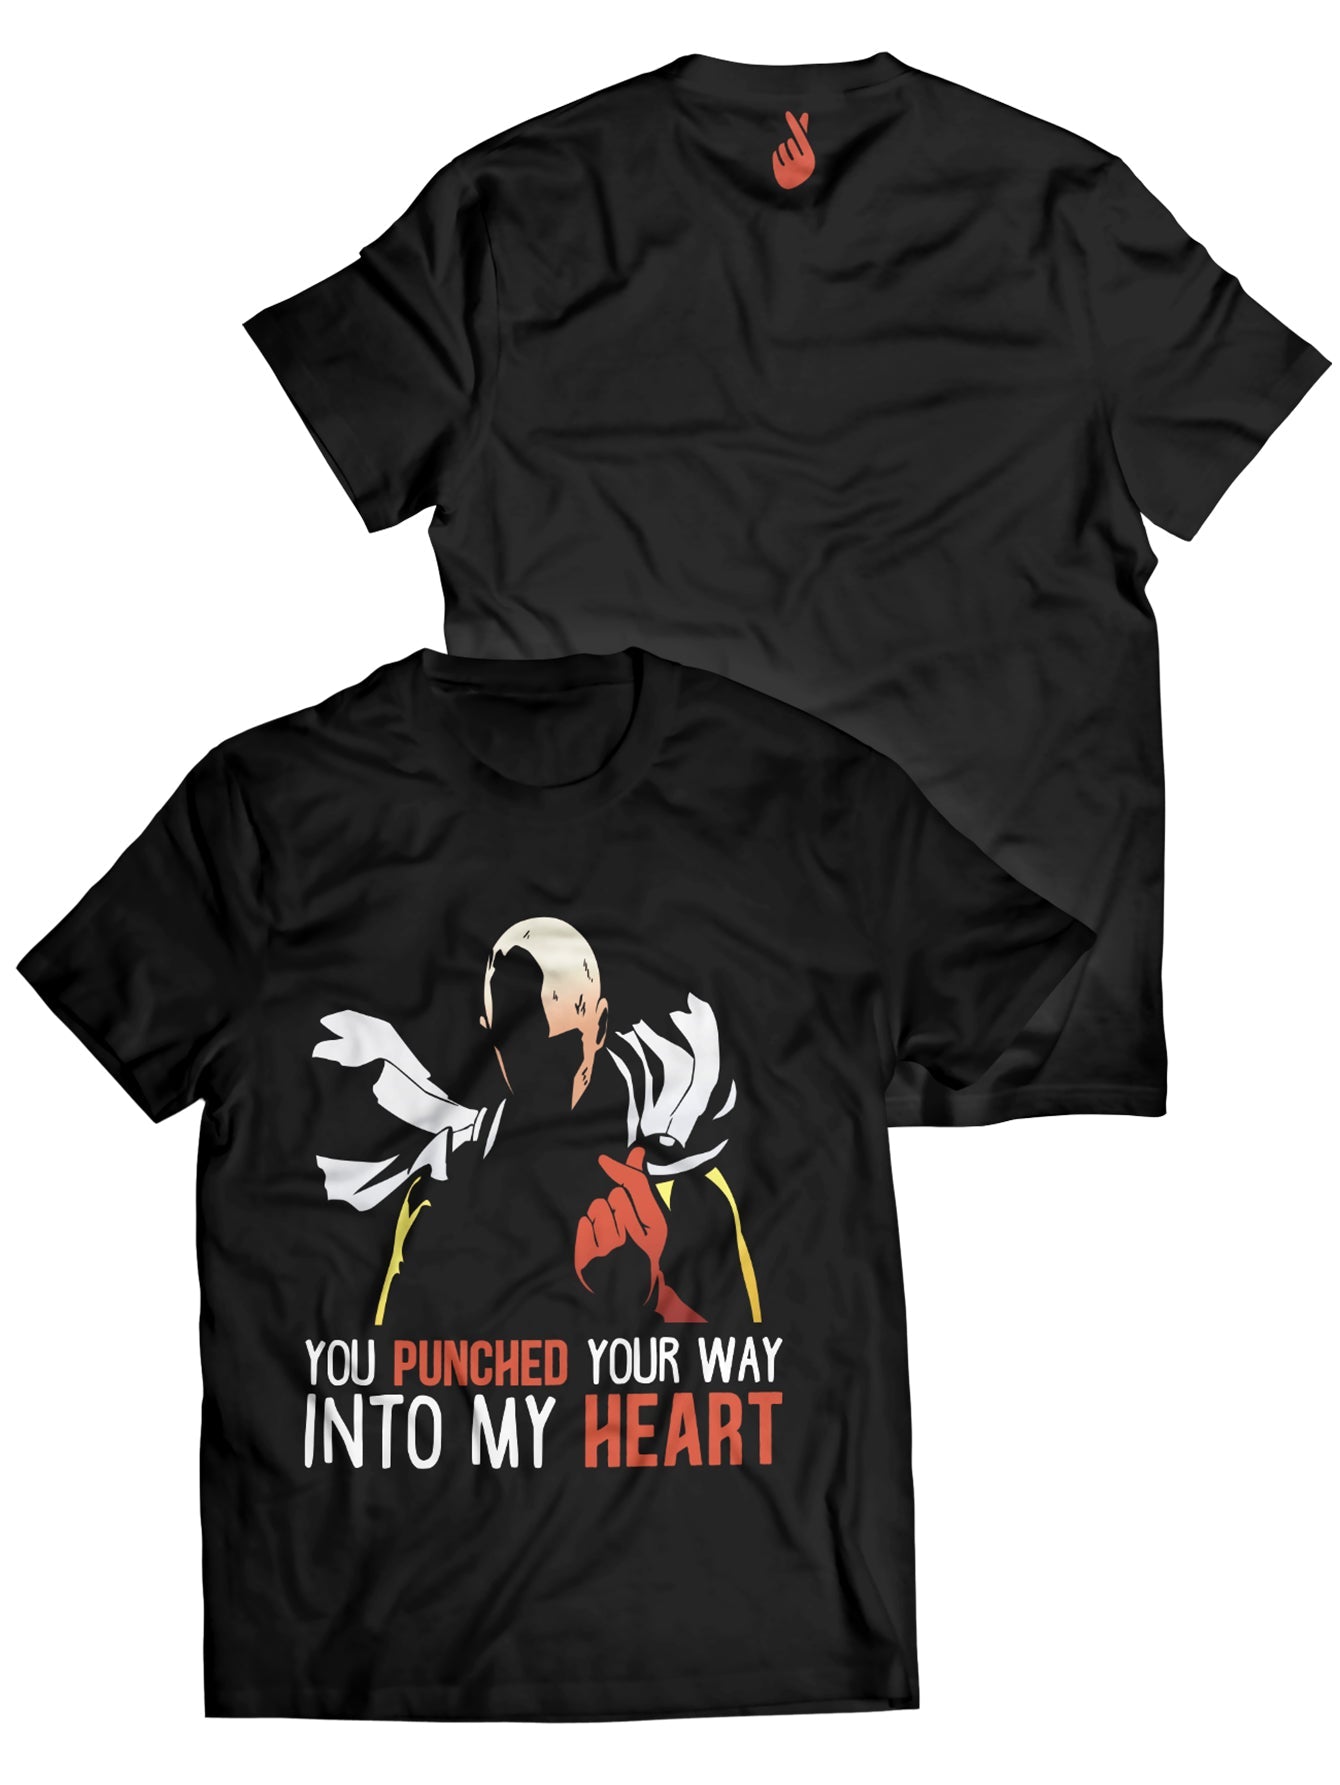 Fandomaniax - You punched your way into my heart Unisex T-Shirt